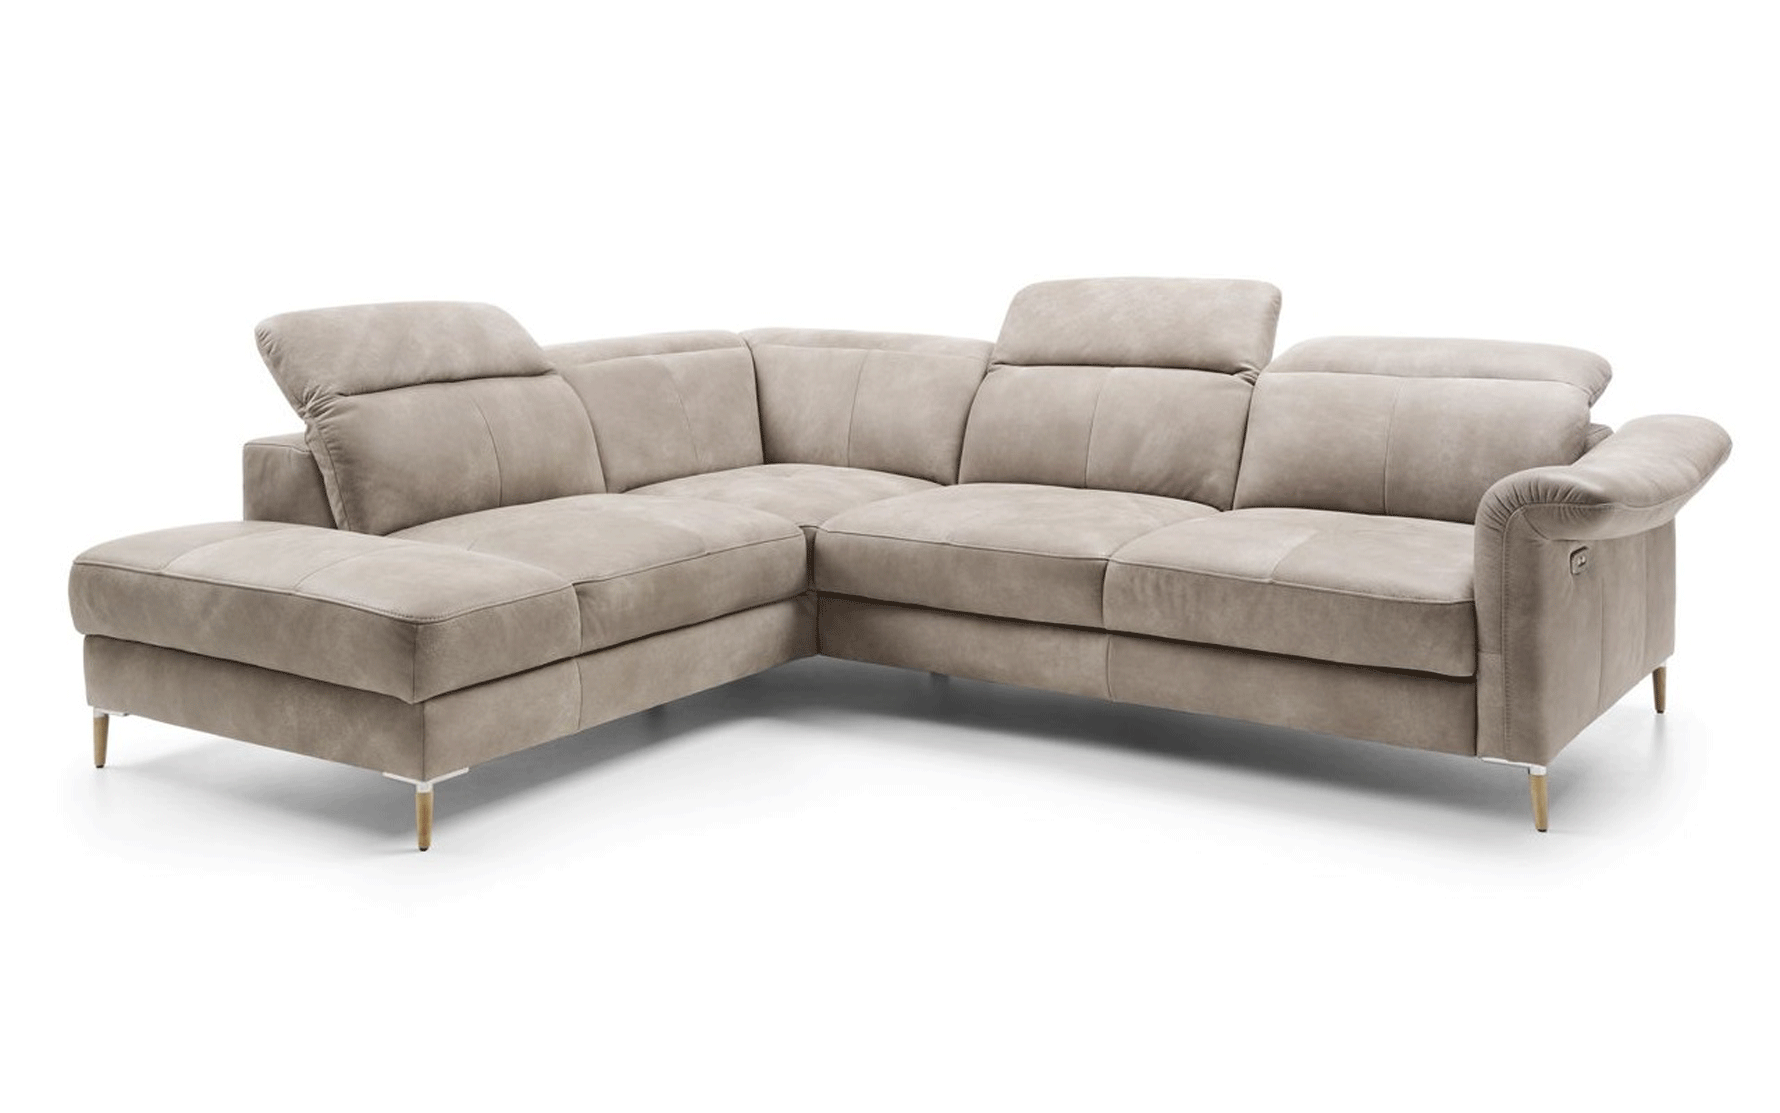 Exotic Slipcovered Sectional Sofa Bed - Click Image to Close